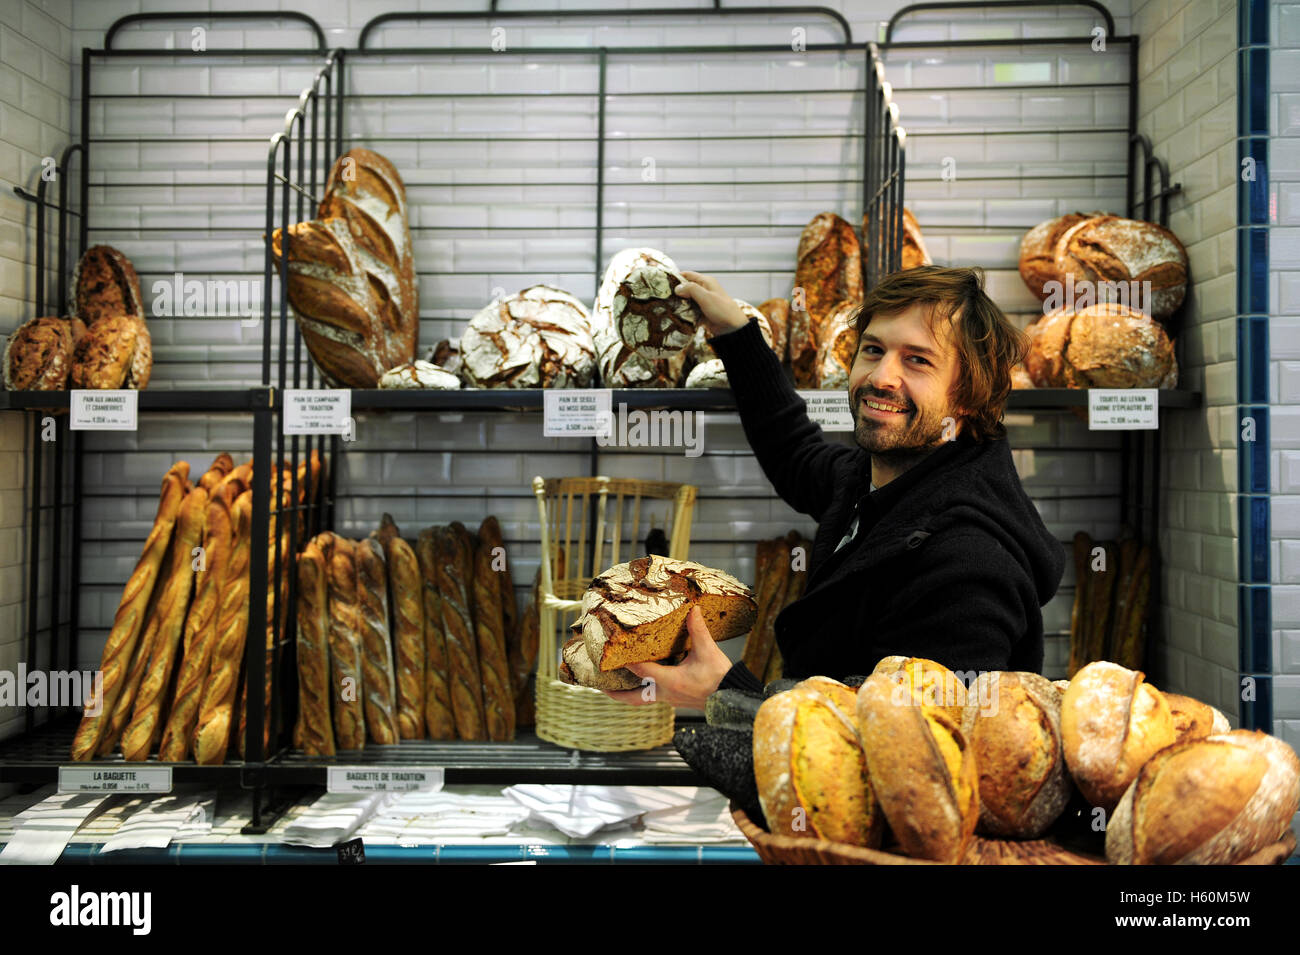 French baker and pastry chef Gontran Cherrier in his bakery in rue Caulaincourt in Paris, France Stock Photo